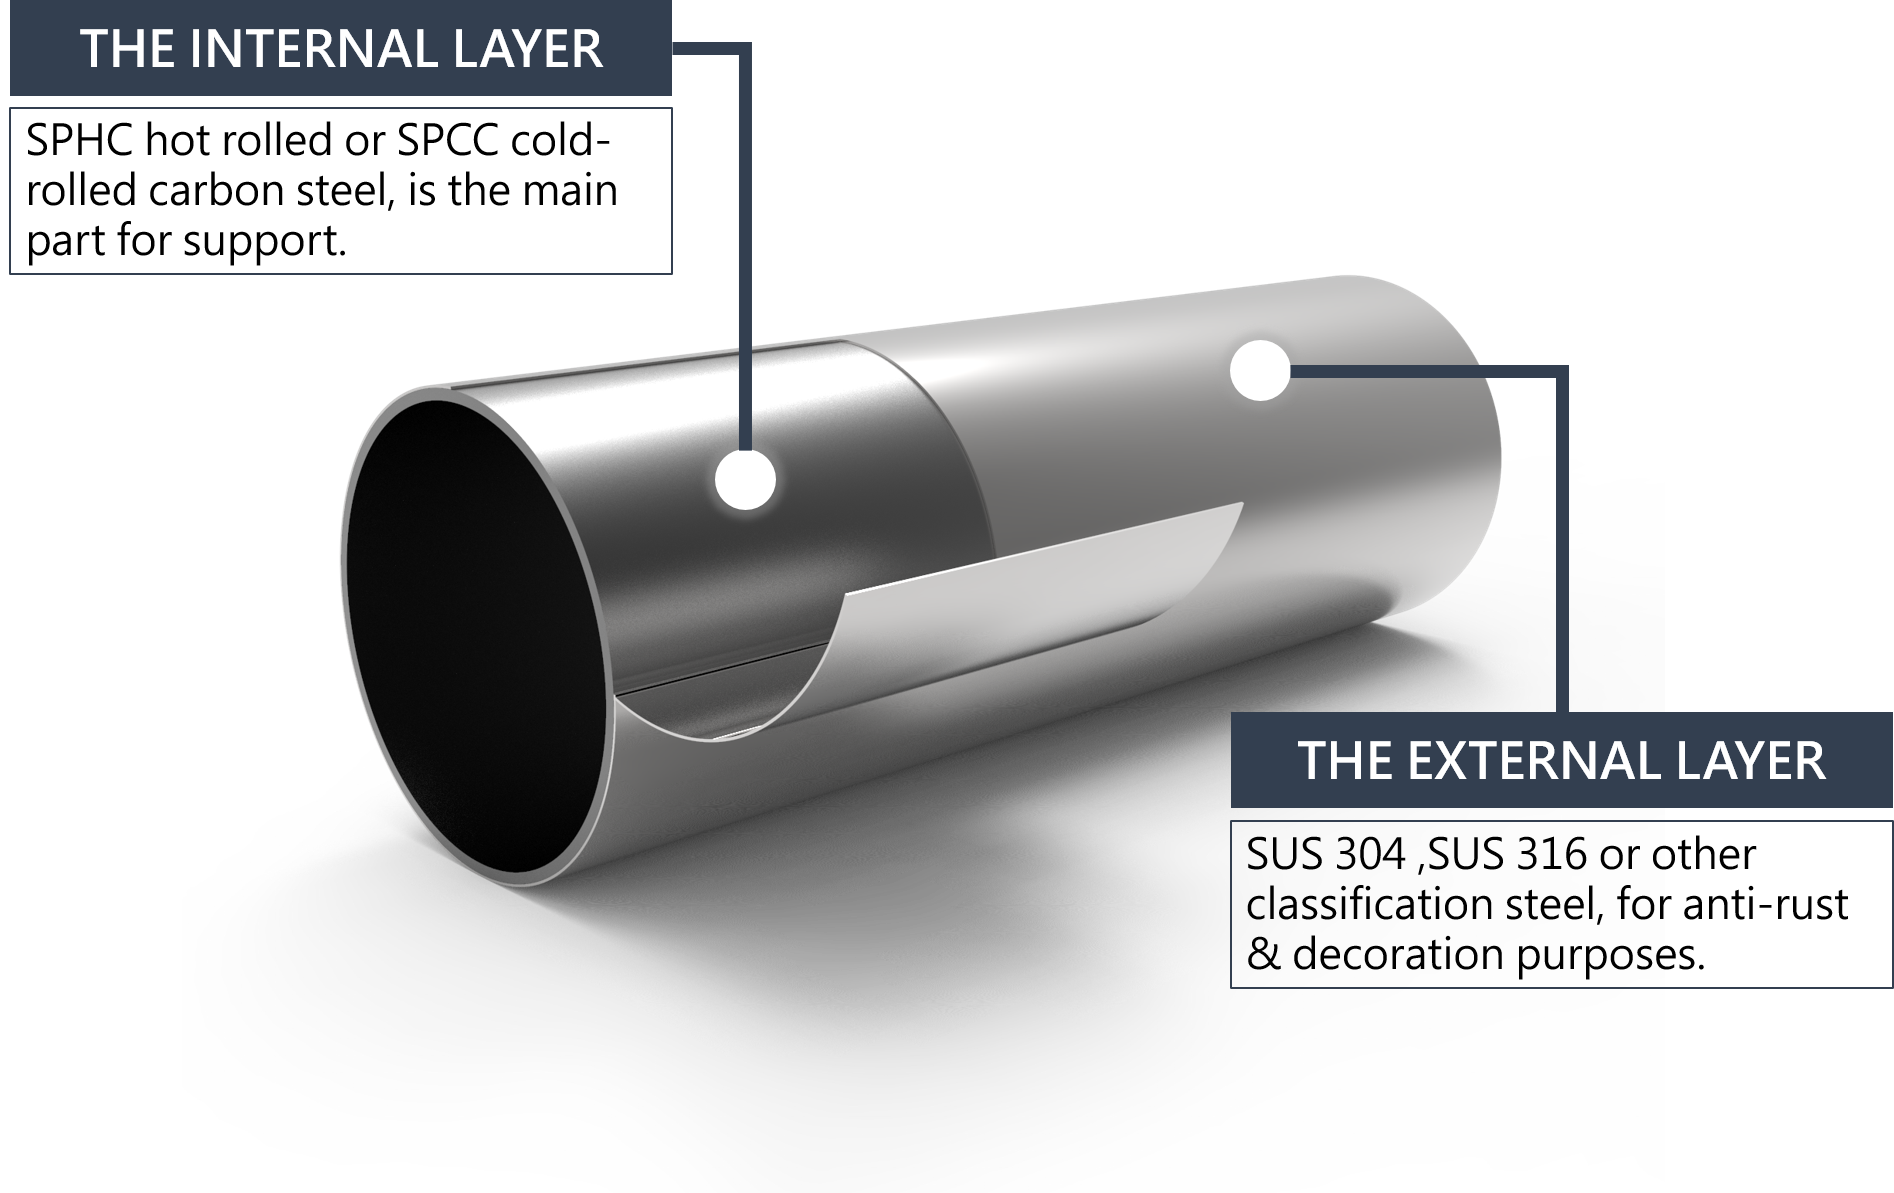 Showing the material benefits of stainless steel tubing.